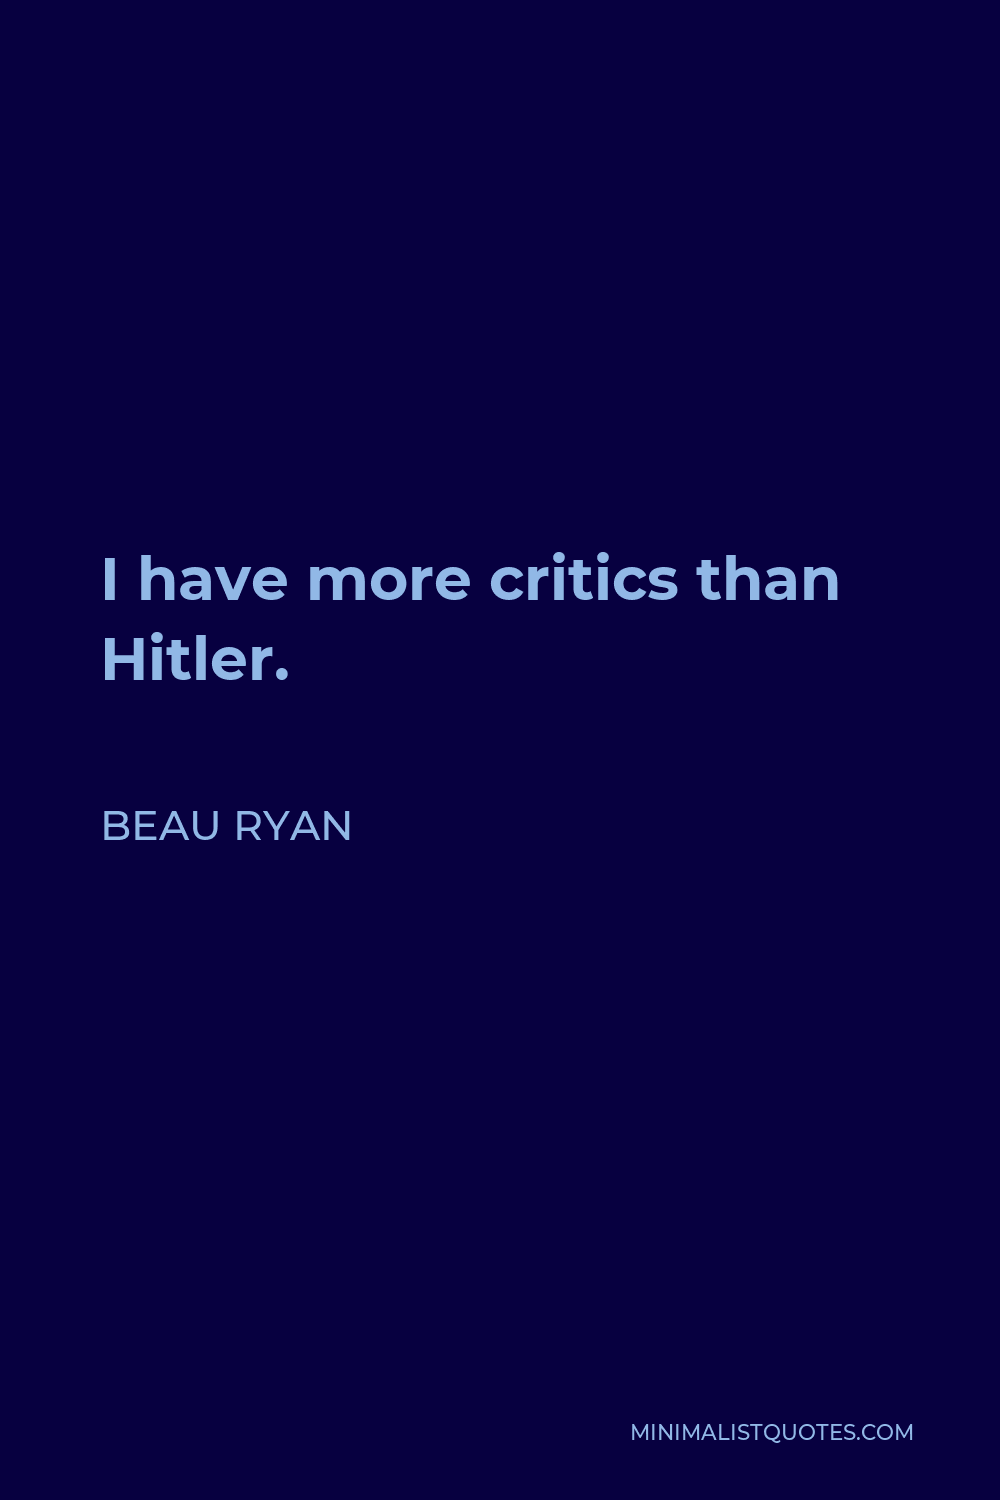 Beau Ryan Quote - I have more critics than Hitler.